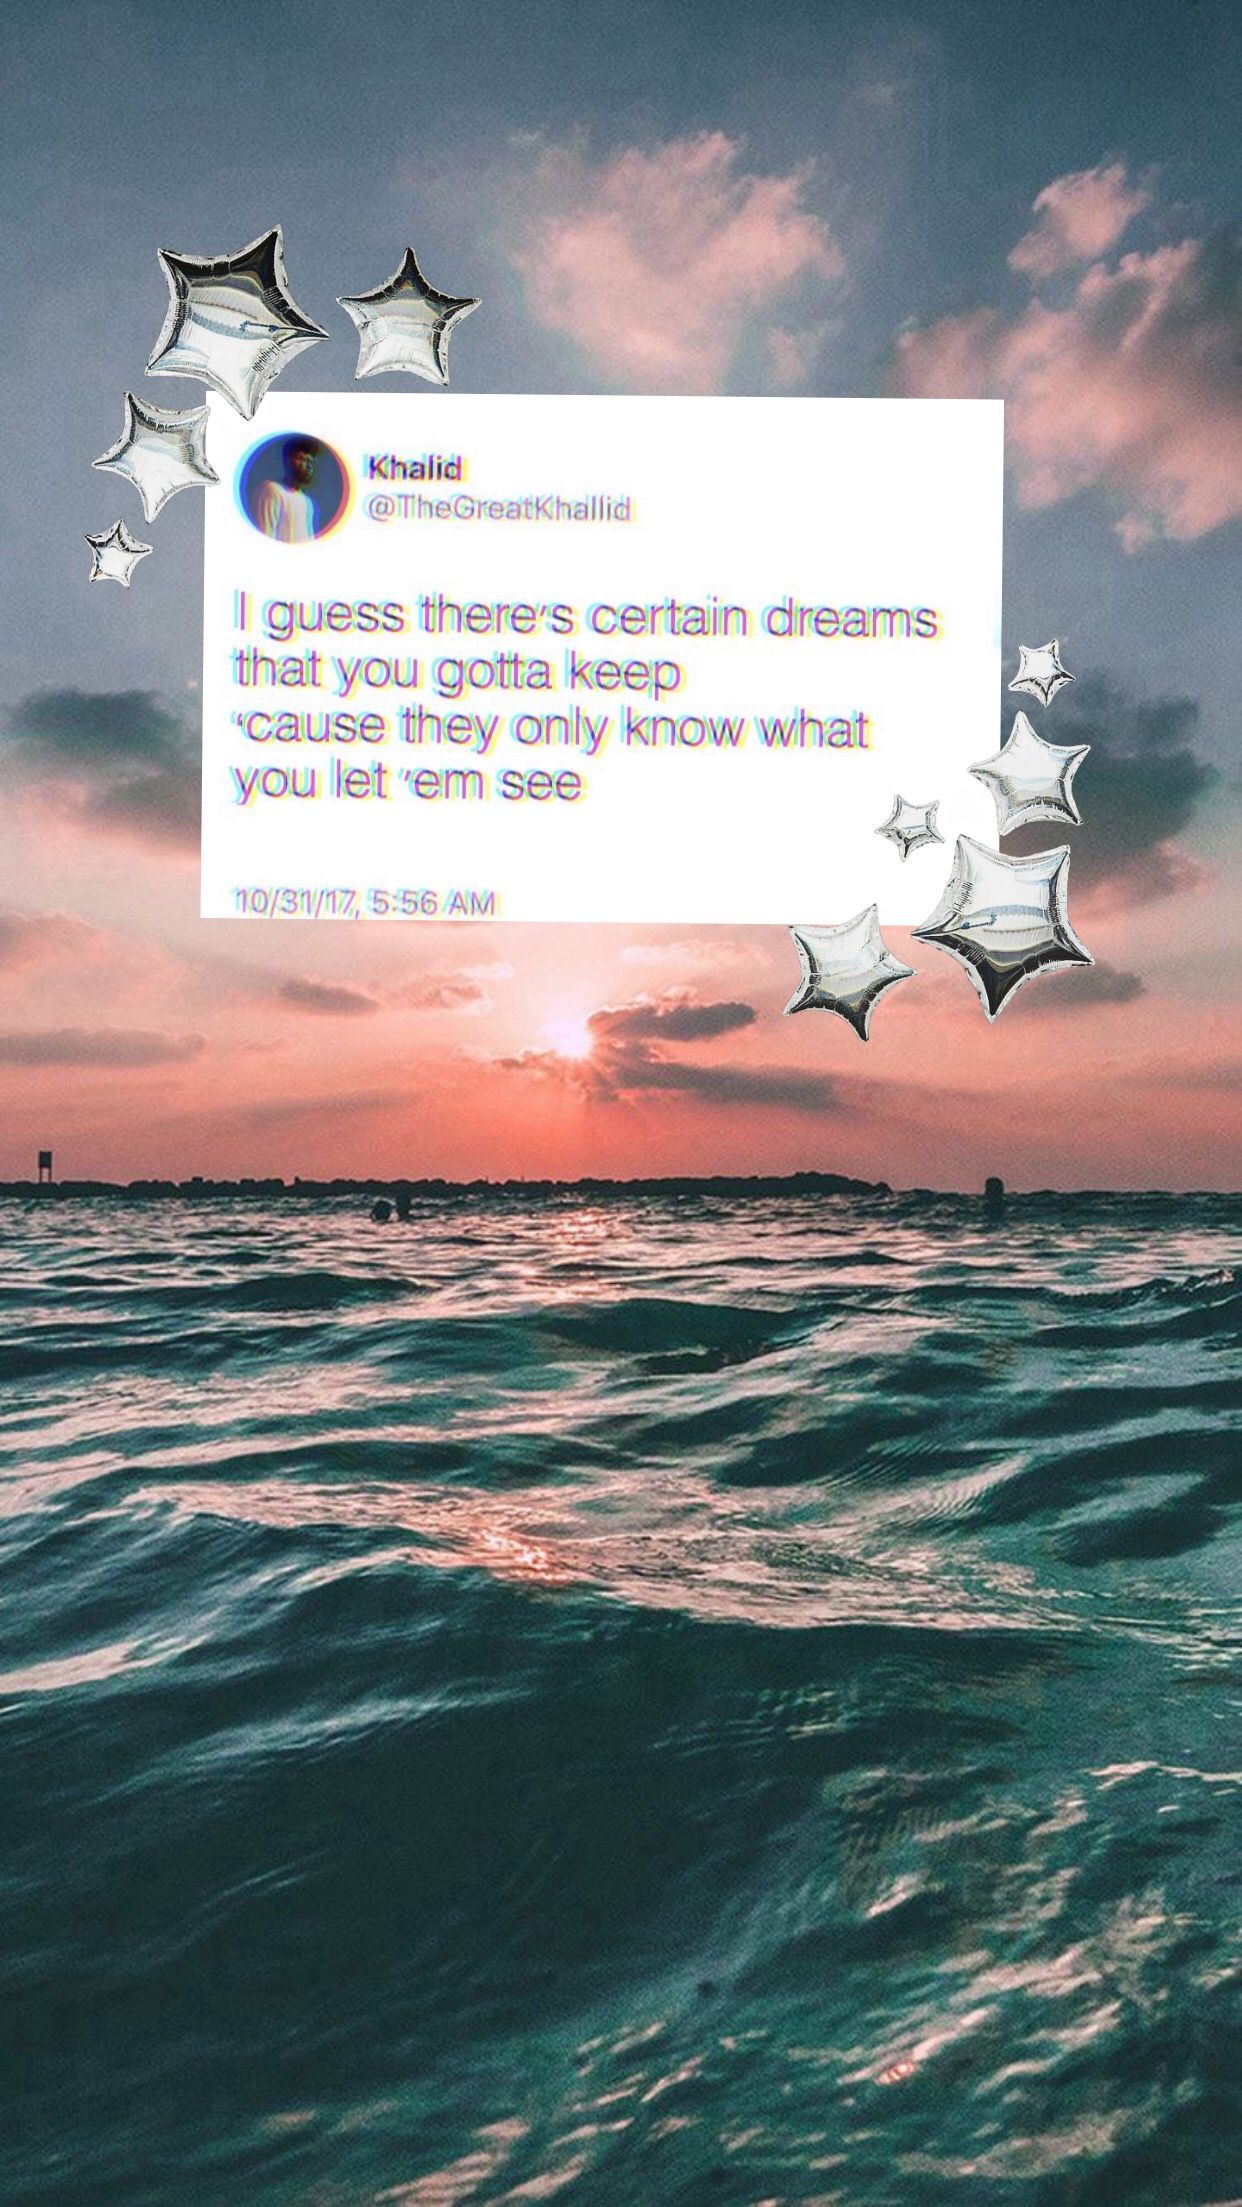 Here's a wallpaper:) Khalid inspires me so much. #wallpaper #tweets #sunset. Khalid quotes, Tweet quotes, Inspirational tweets